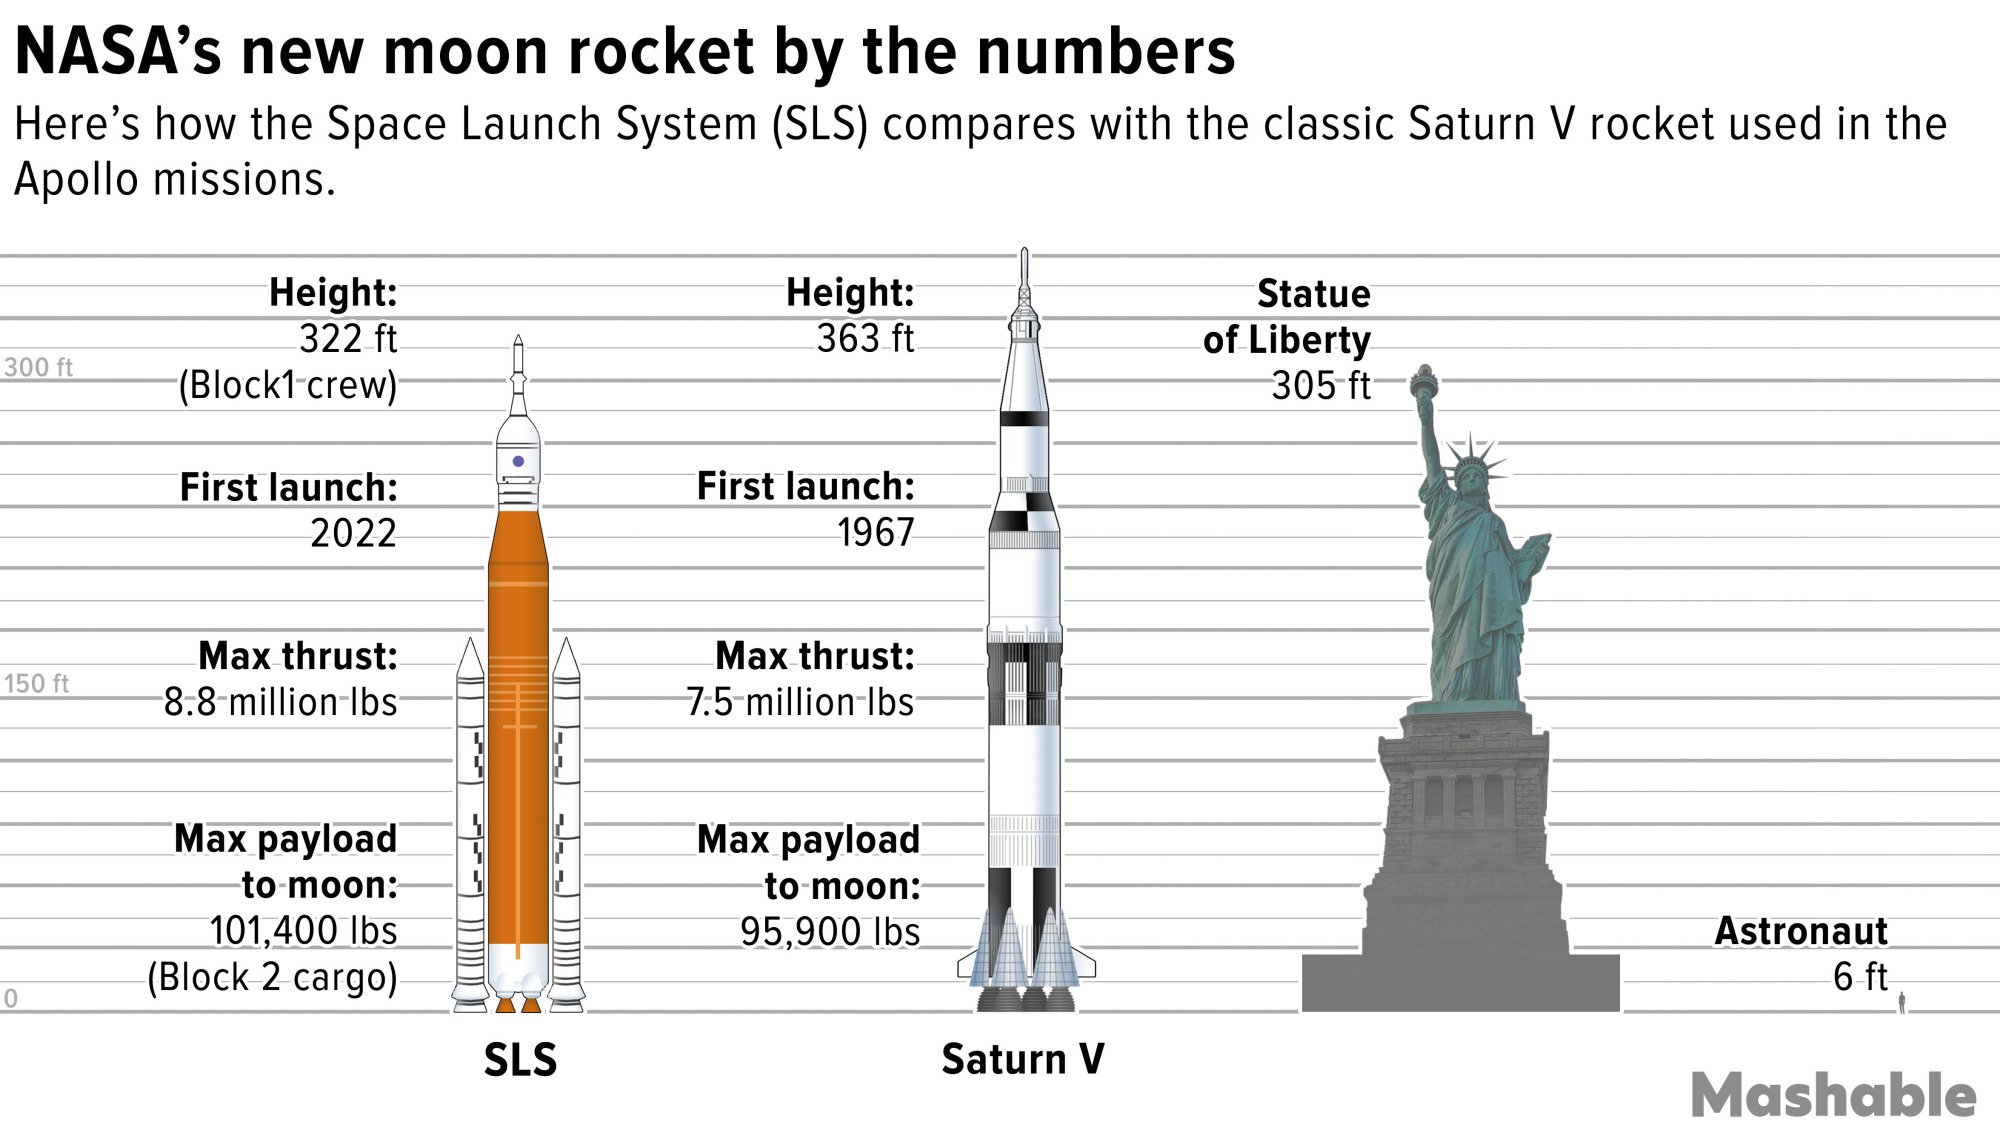 comparison of NASA's SLS and Saturn V rockets with the Statue of Liberty